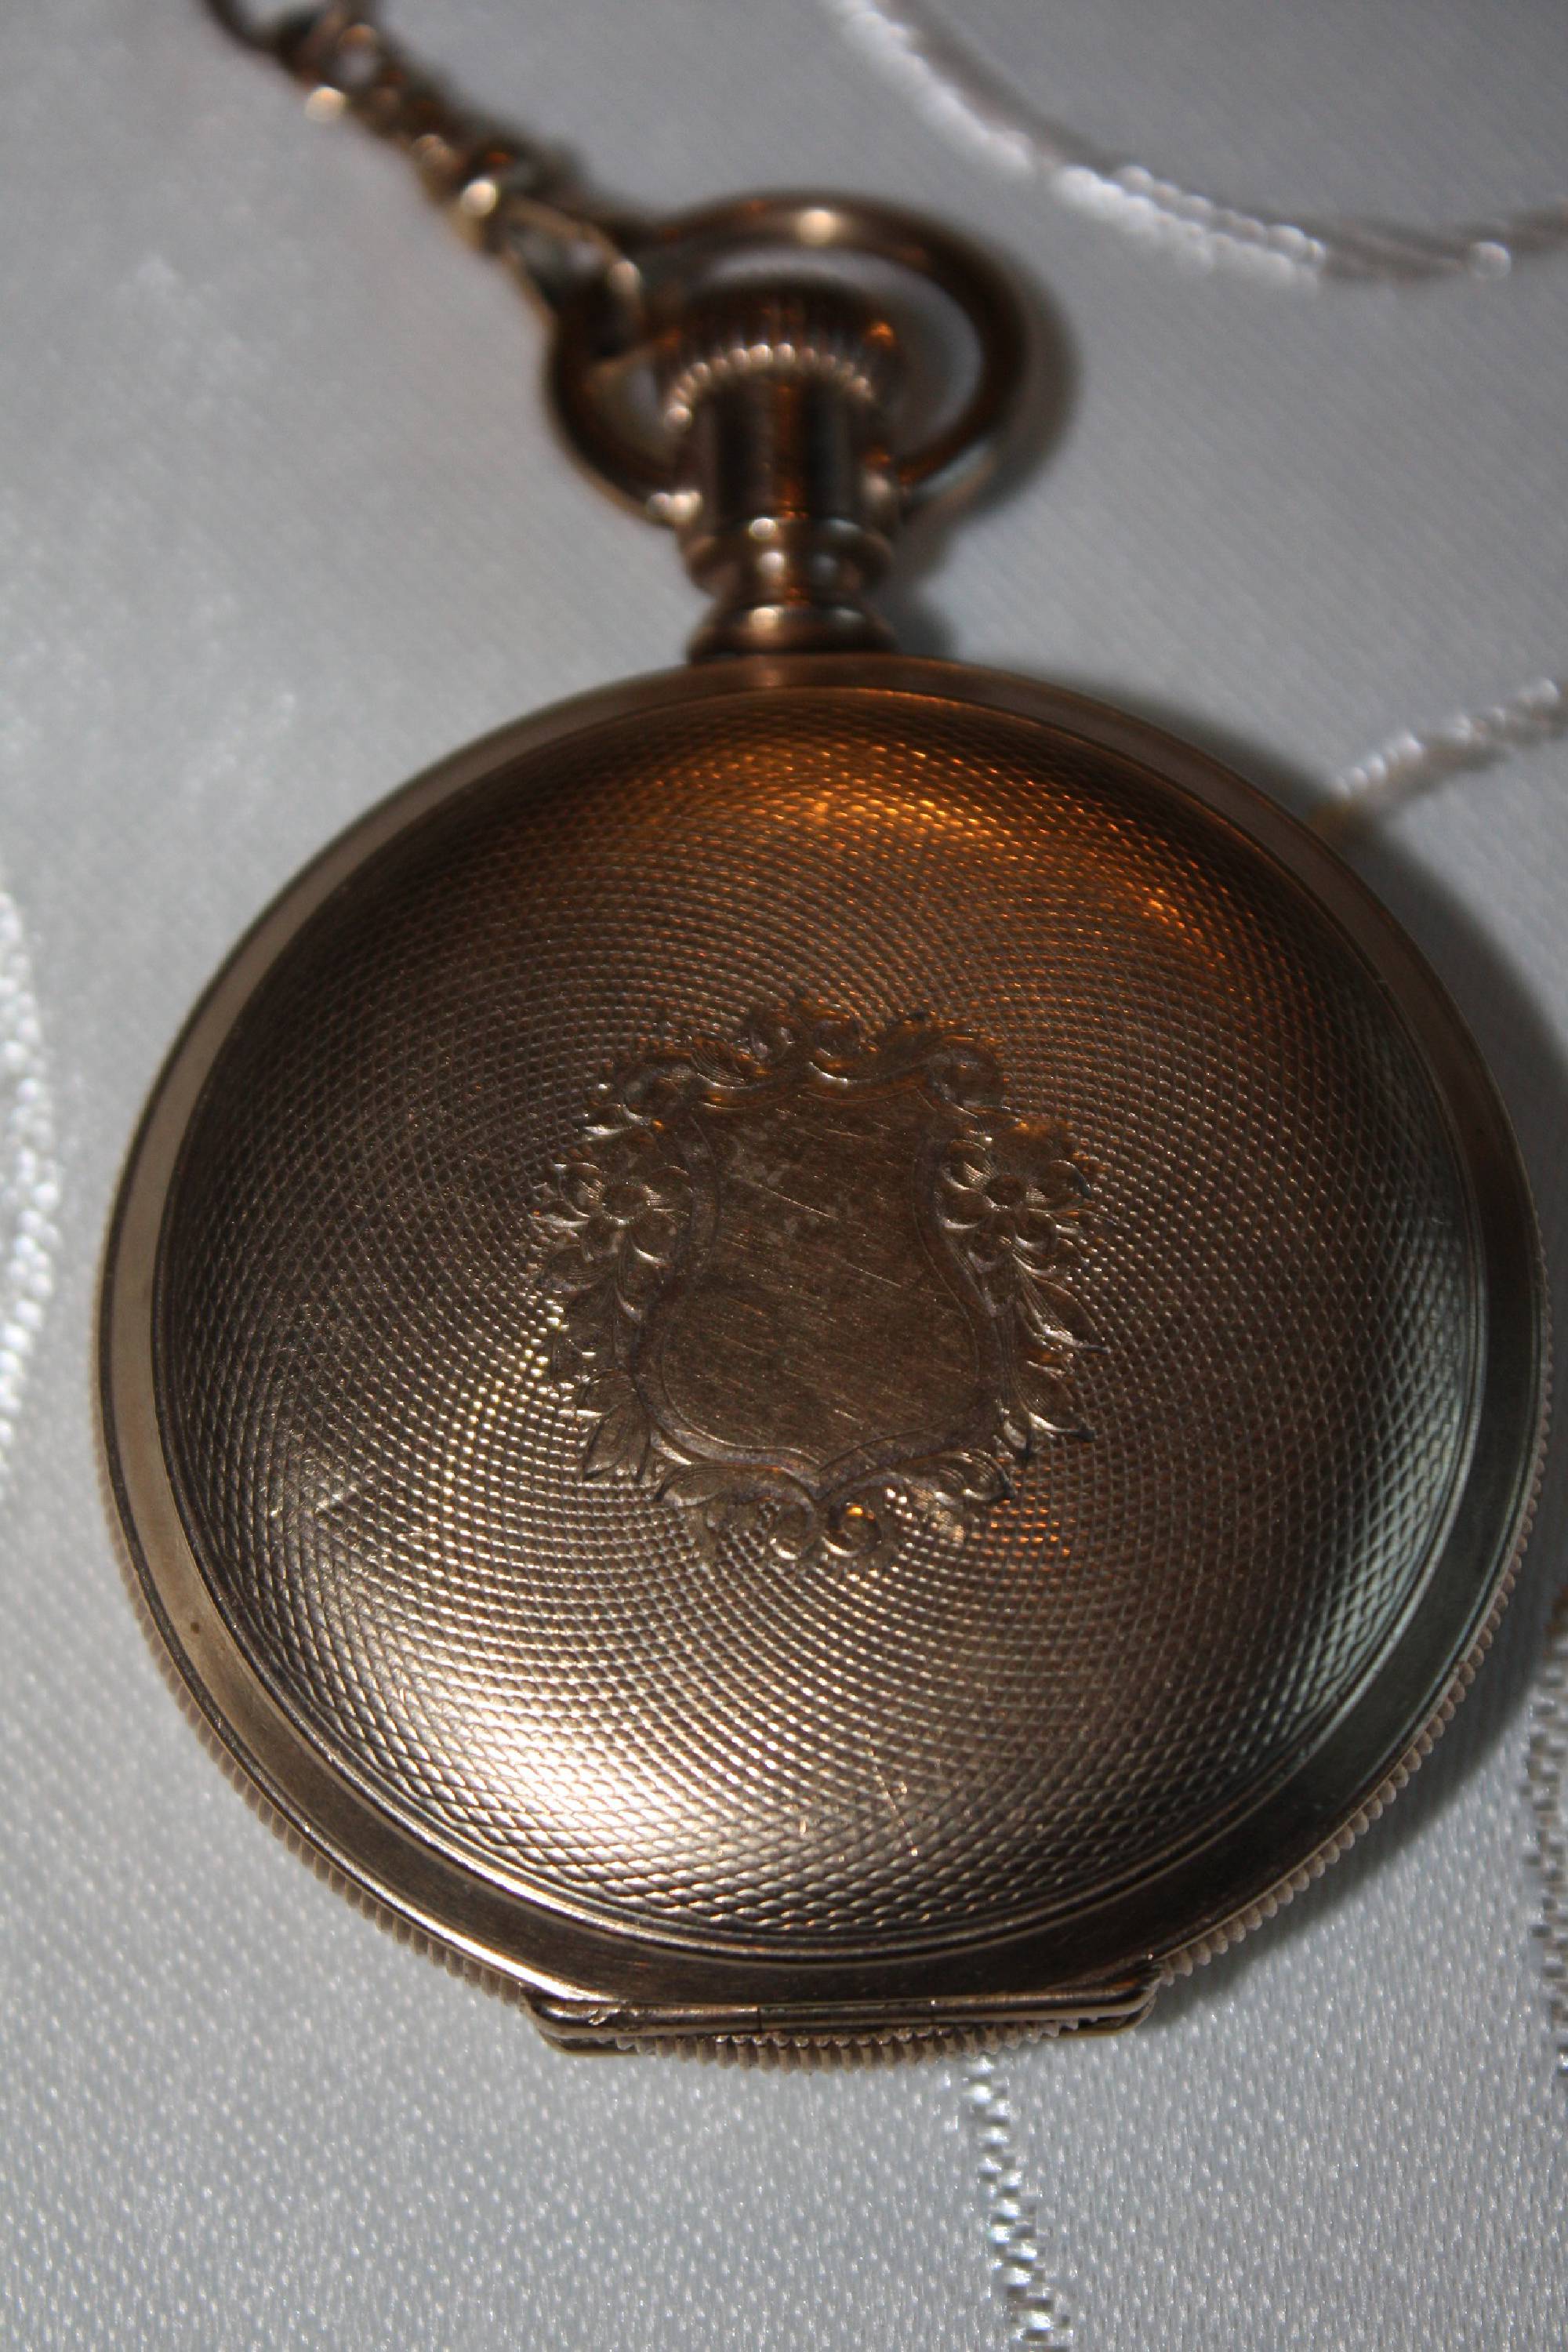 A nice big antique 1900 American railroad pocket watch by American Waltham Watch Company, gold-filled case